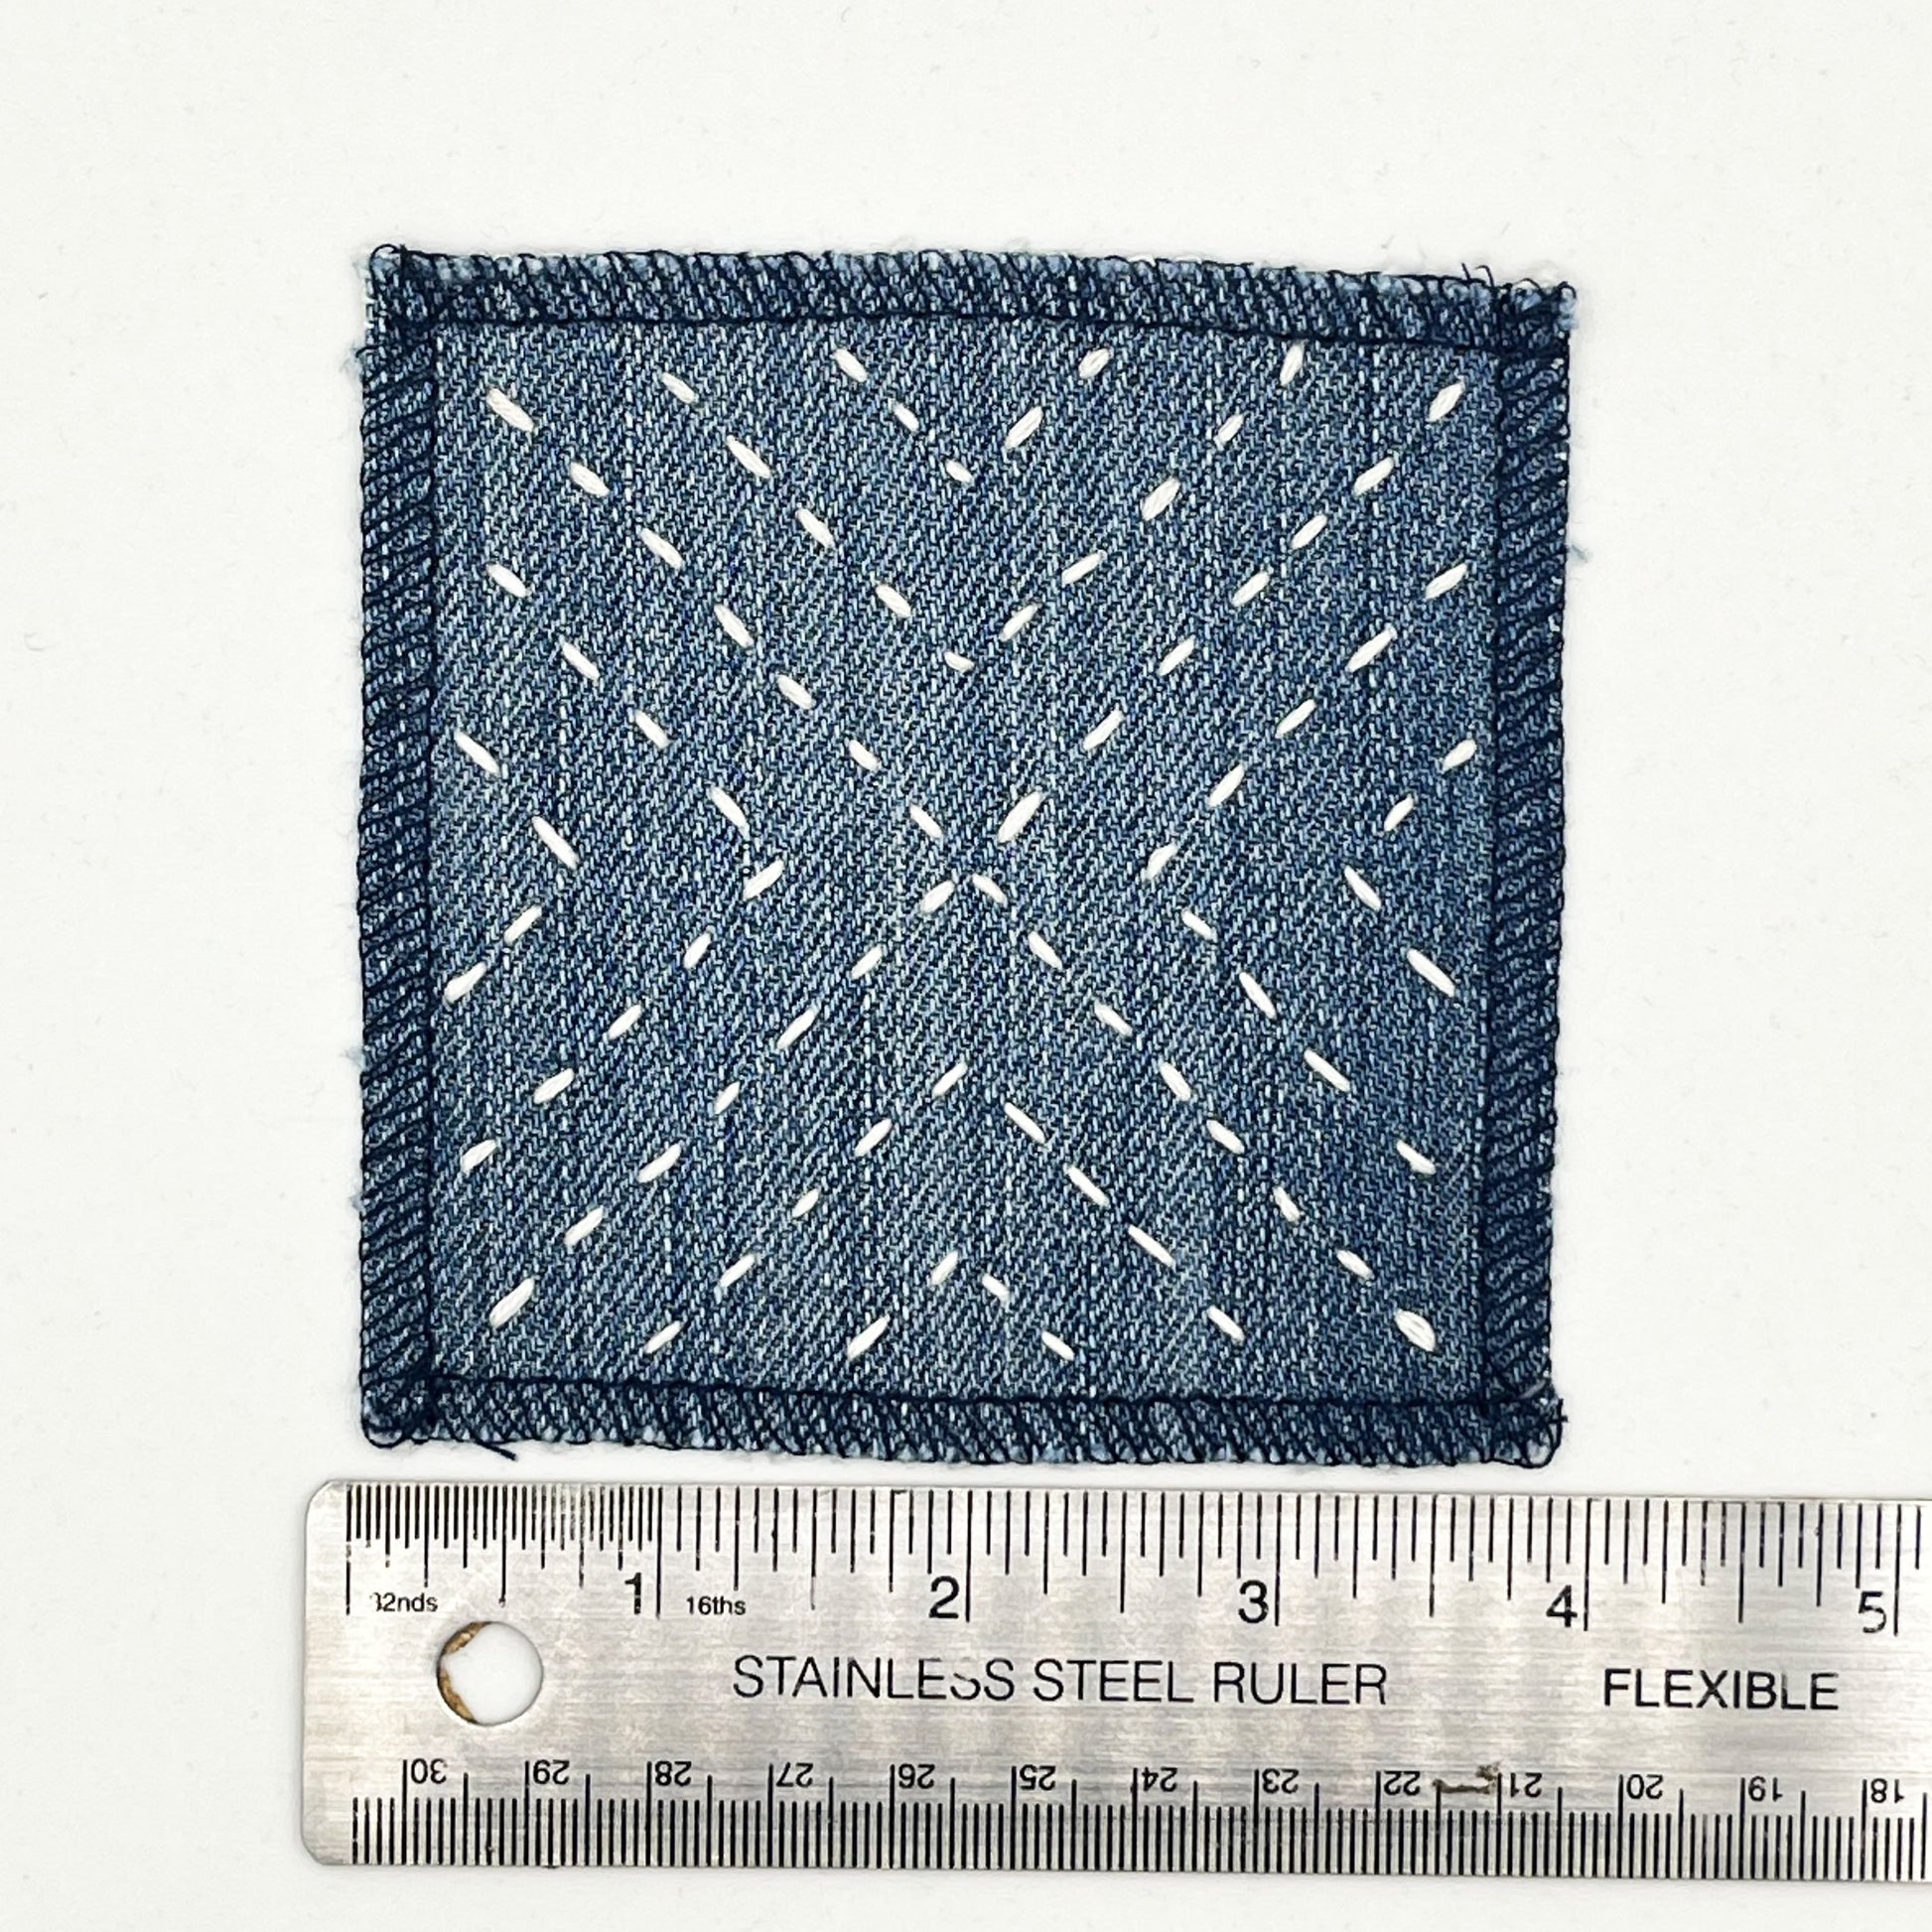 a square patch made out of denim, handstitched with ivory running stitches in a radiating X pattern, with overlocked edges, next to a metal ruler to show a width of 4 inches, on a white background